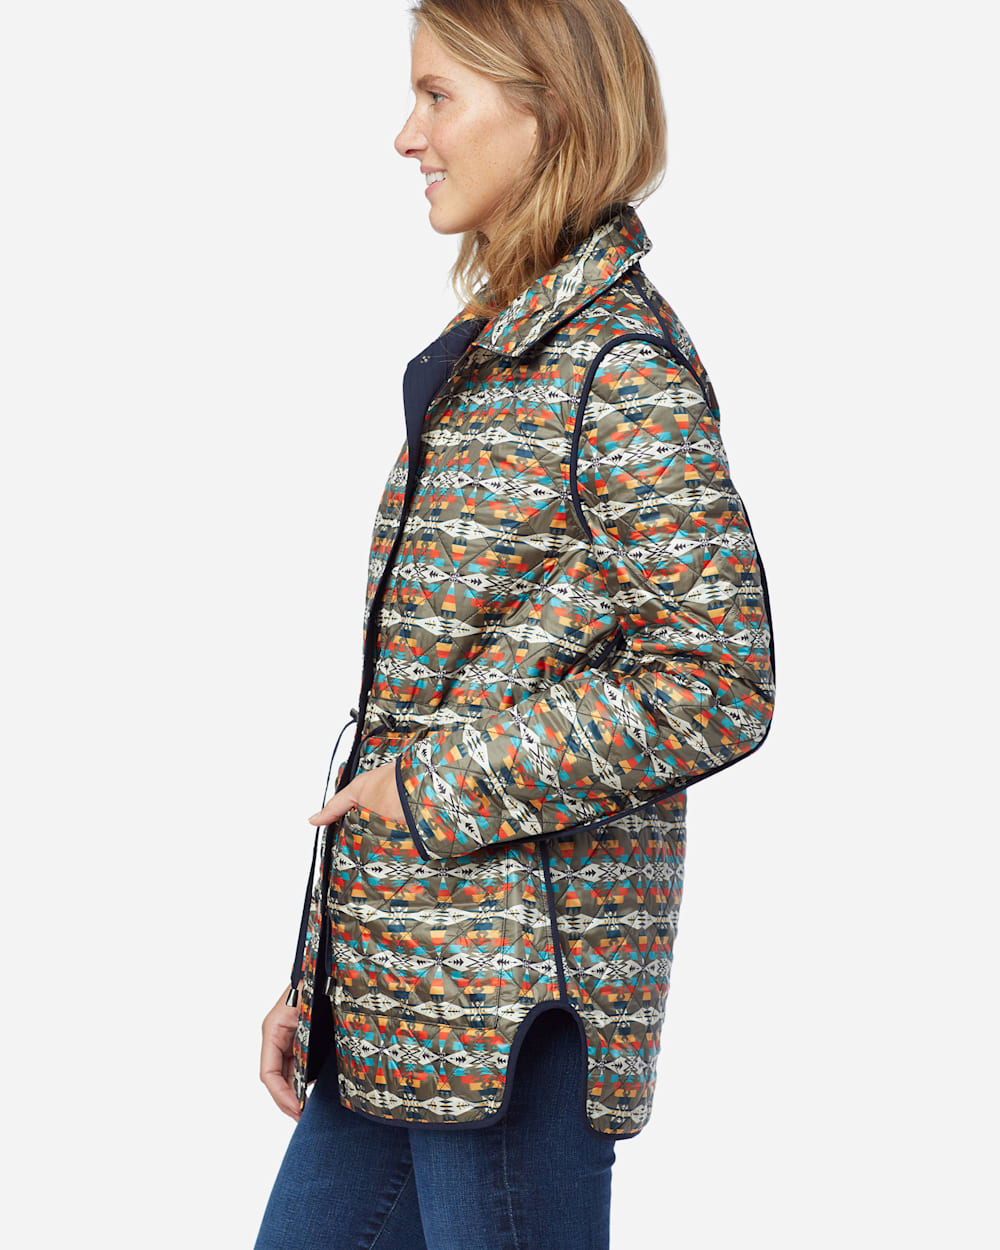 ALTERNATE VIEW OF WOMEN'S MEADOW REVERSIBLE QUILTED JACKET IN TUCSON/NAVY image number 3